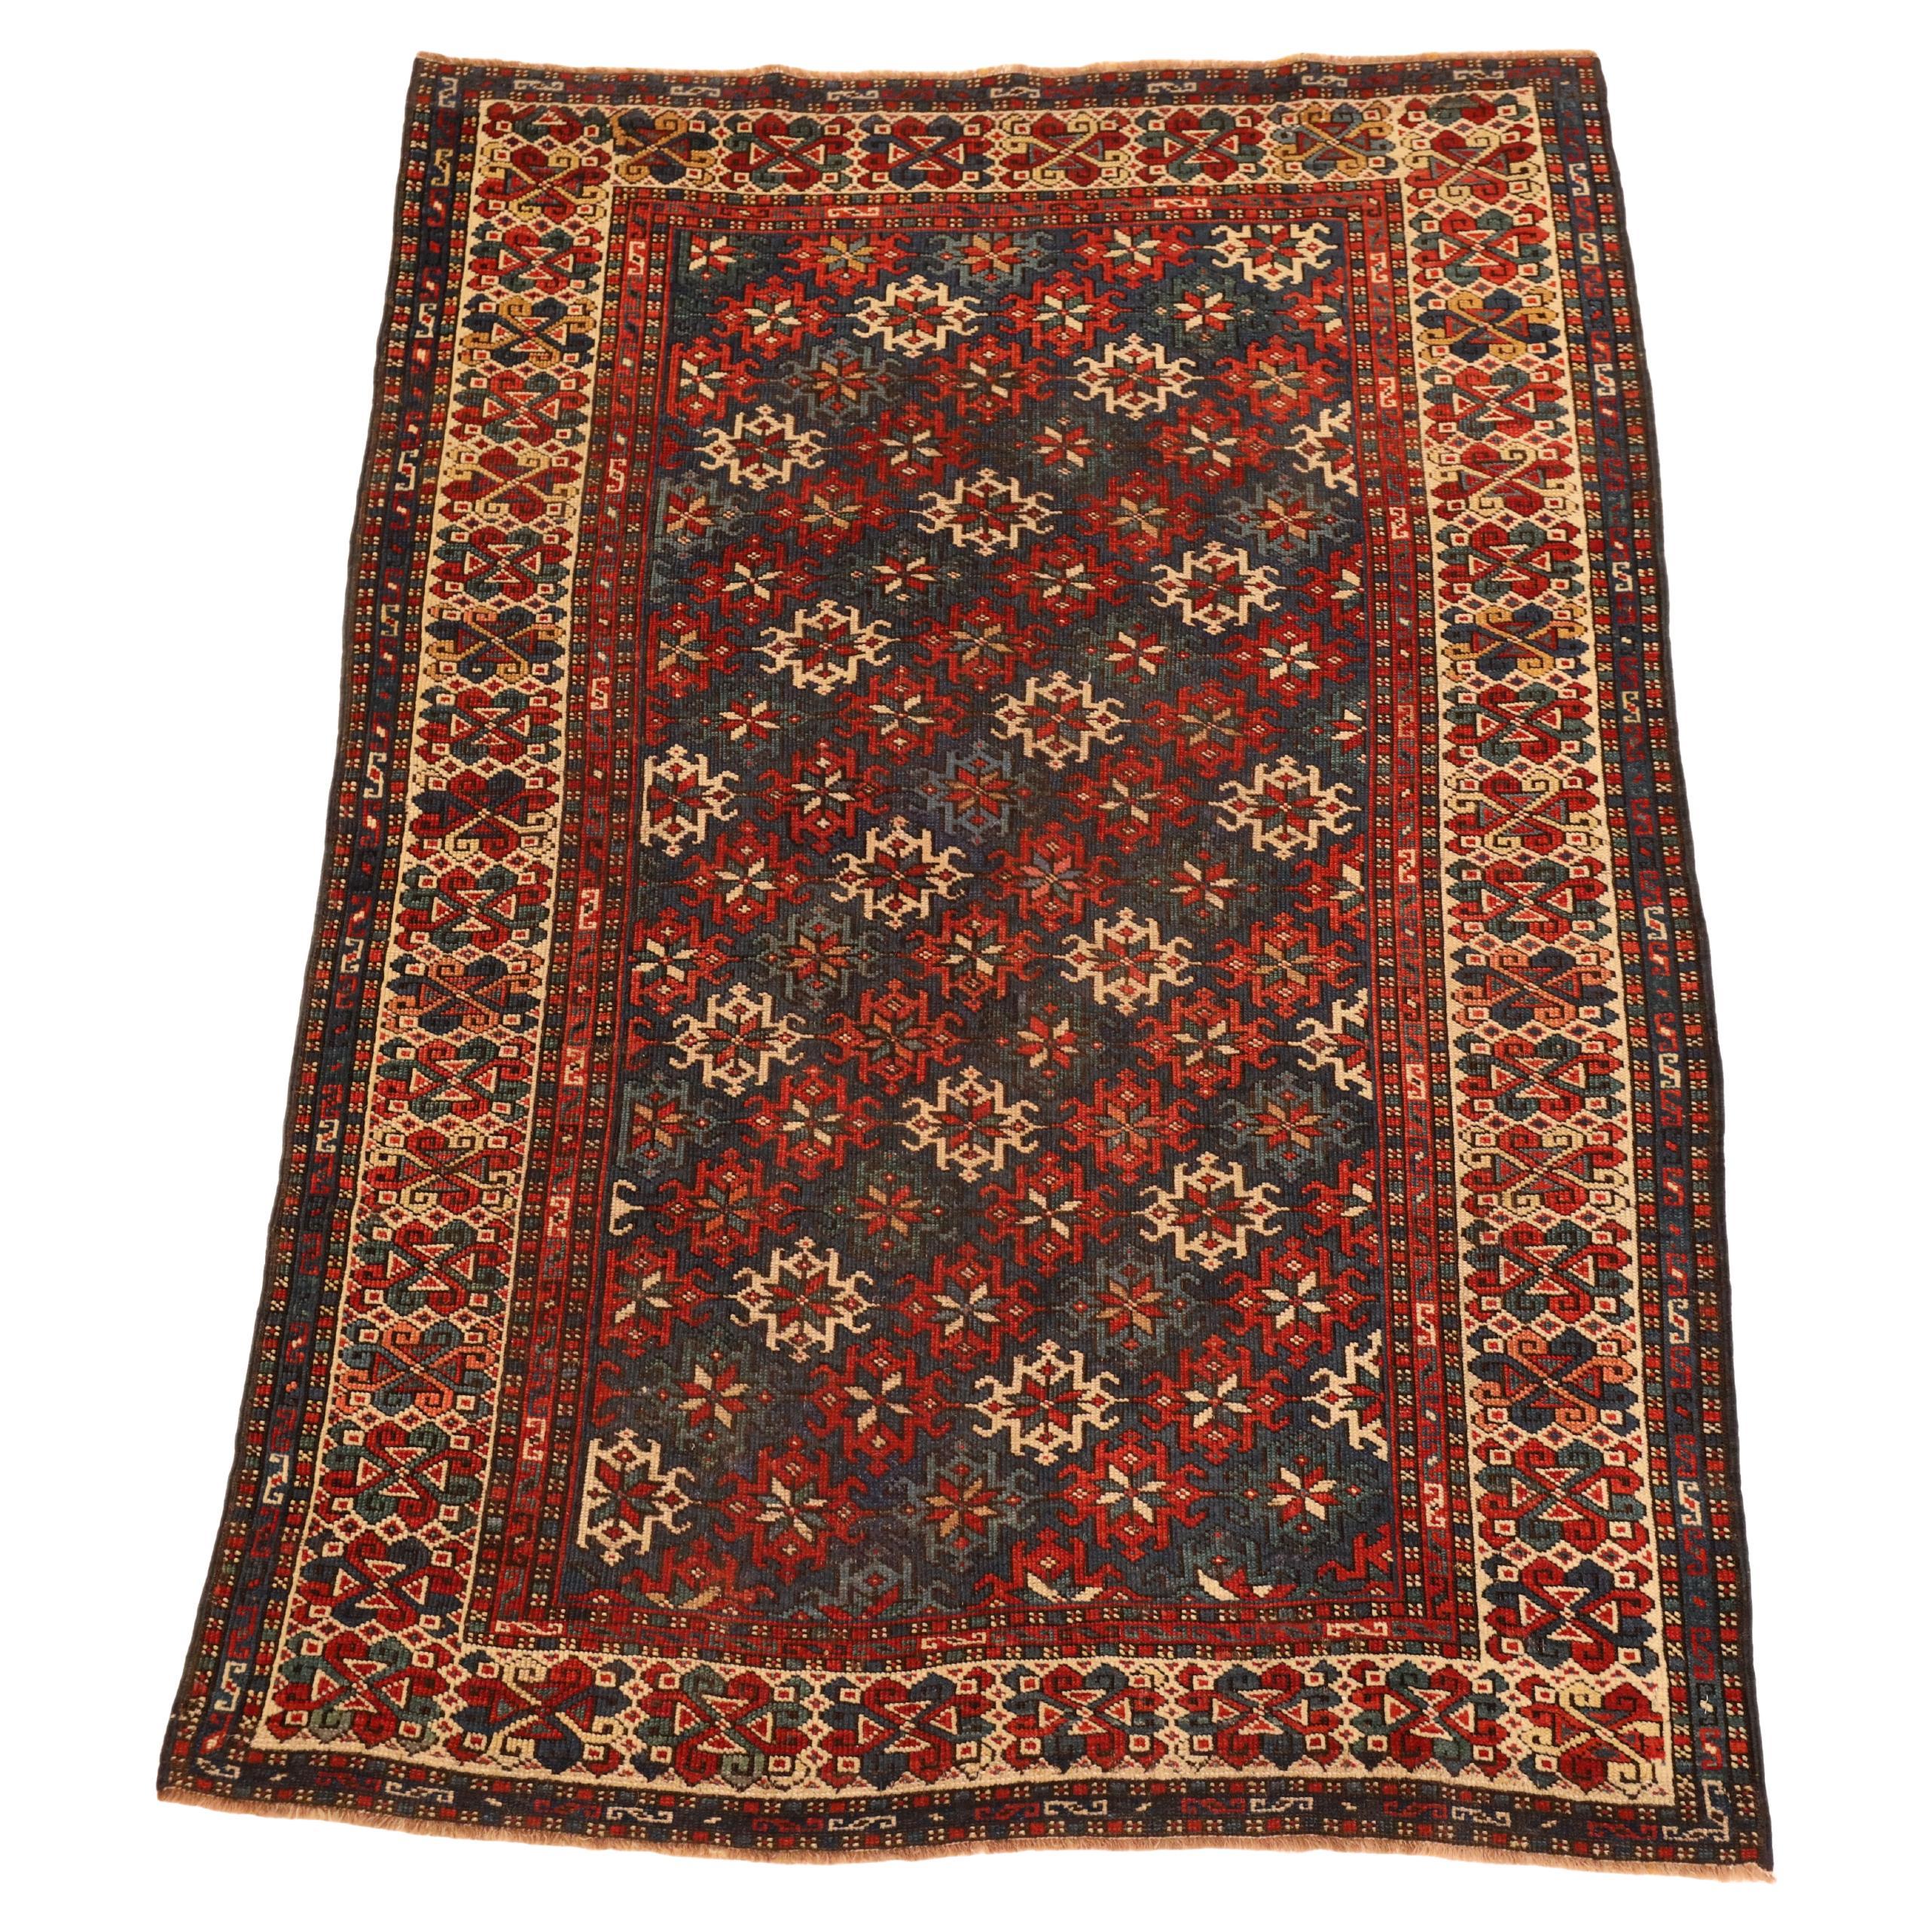 Caucasian Antique Rug, Blue Red Ivory - 3 x 5 For Sale